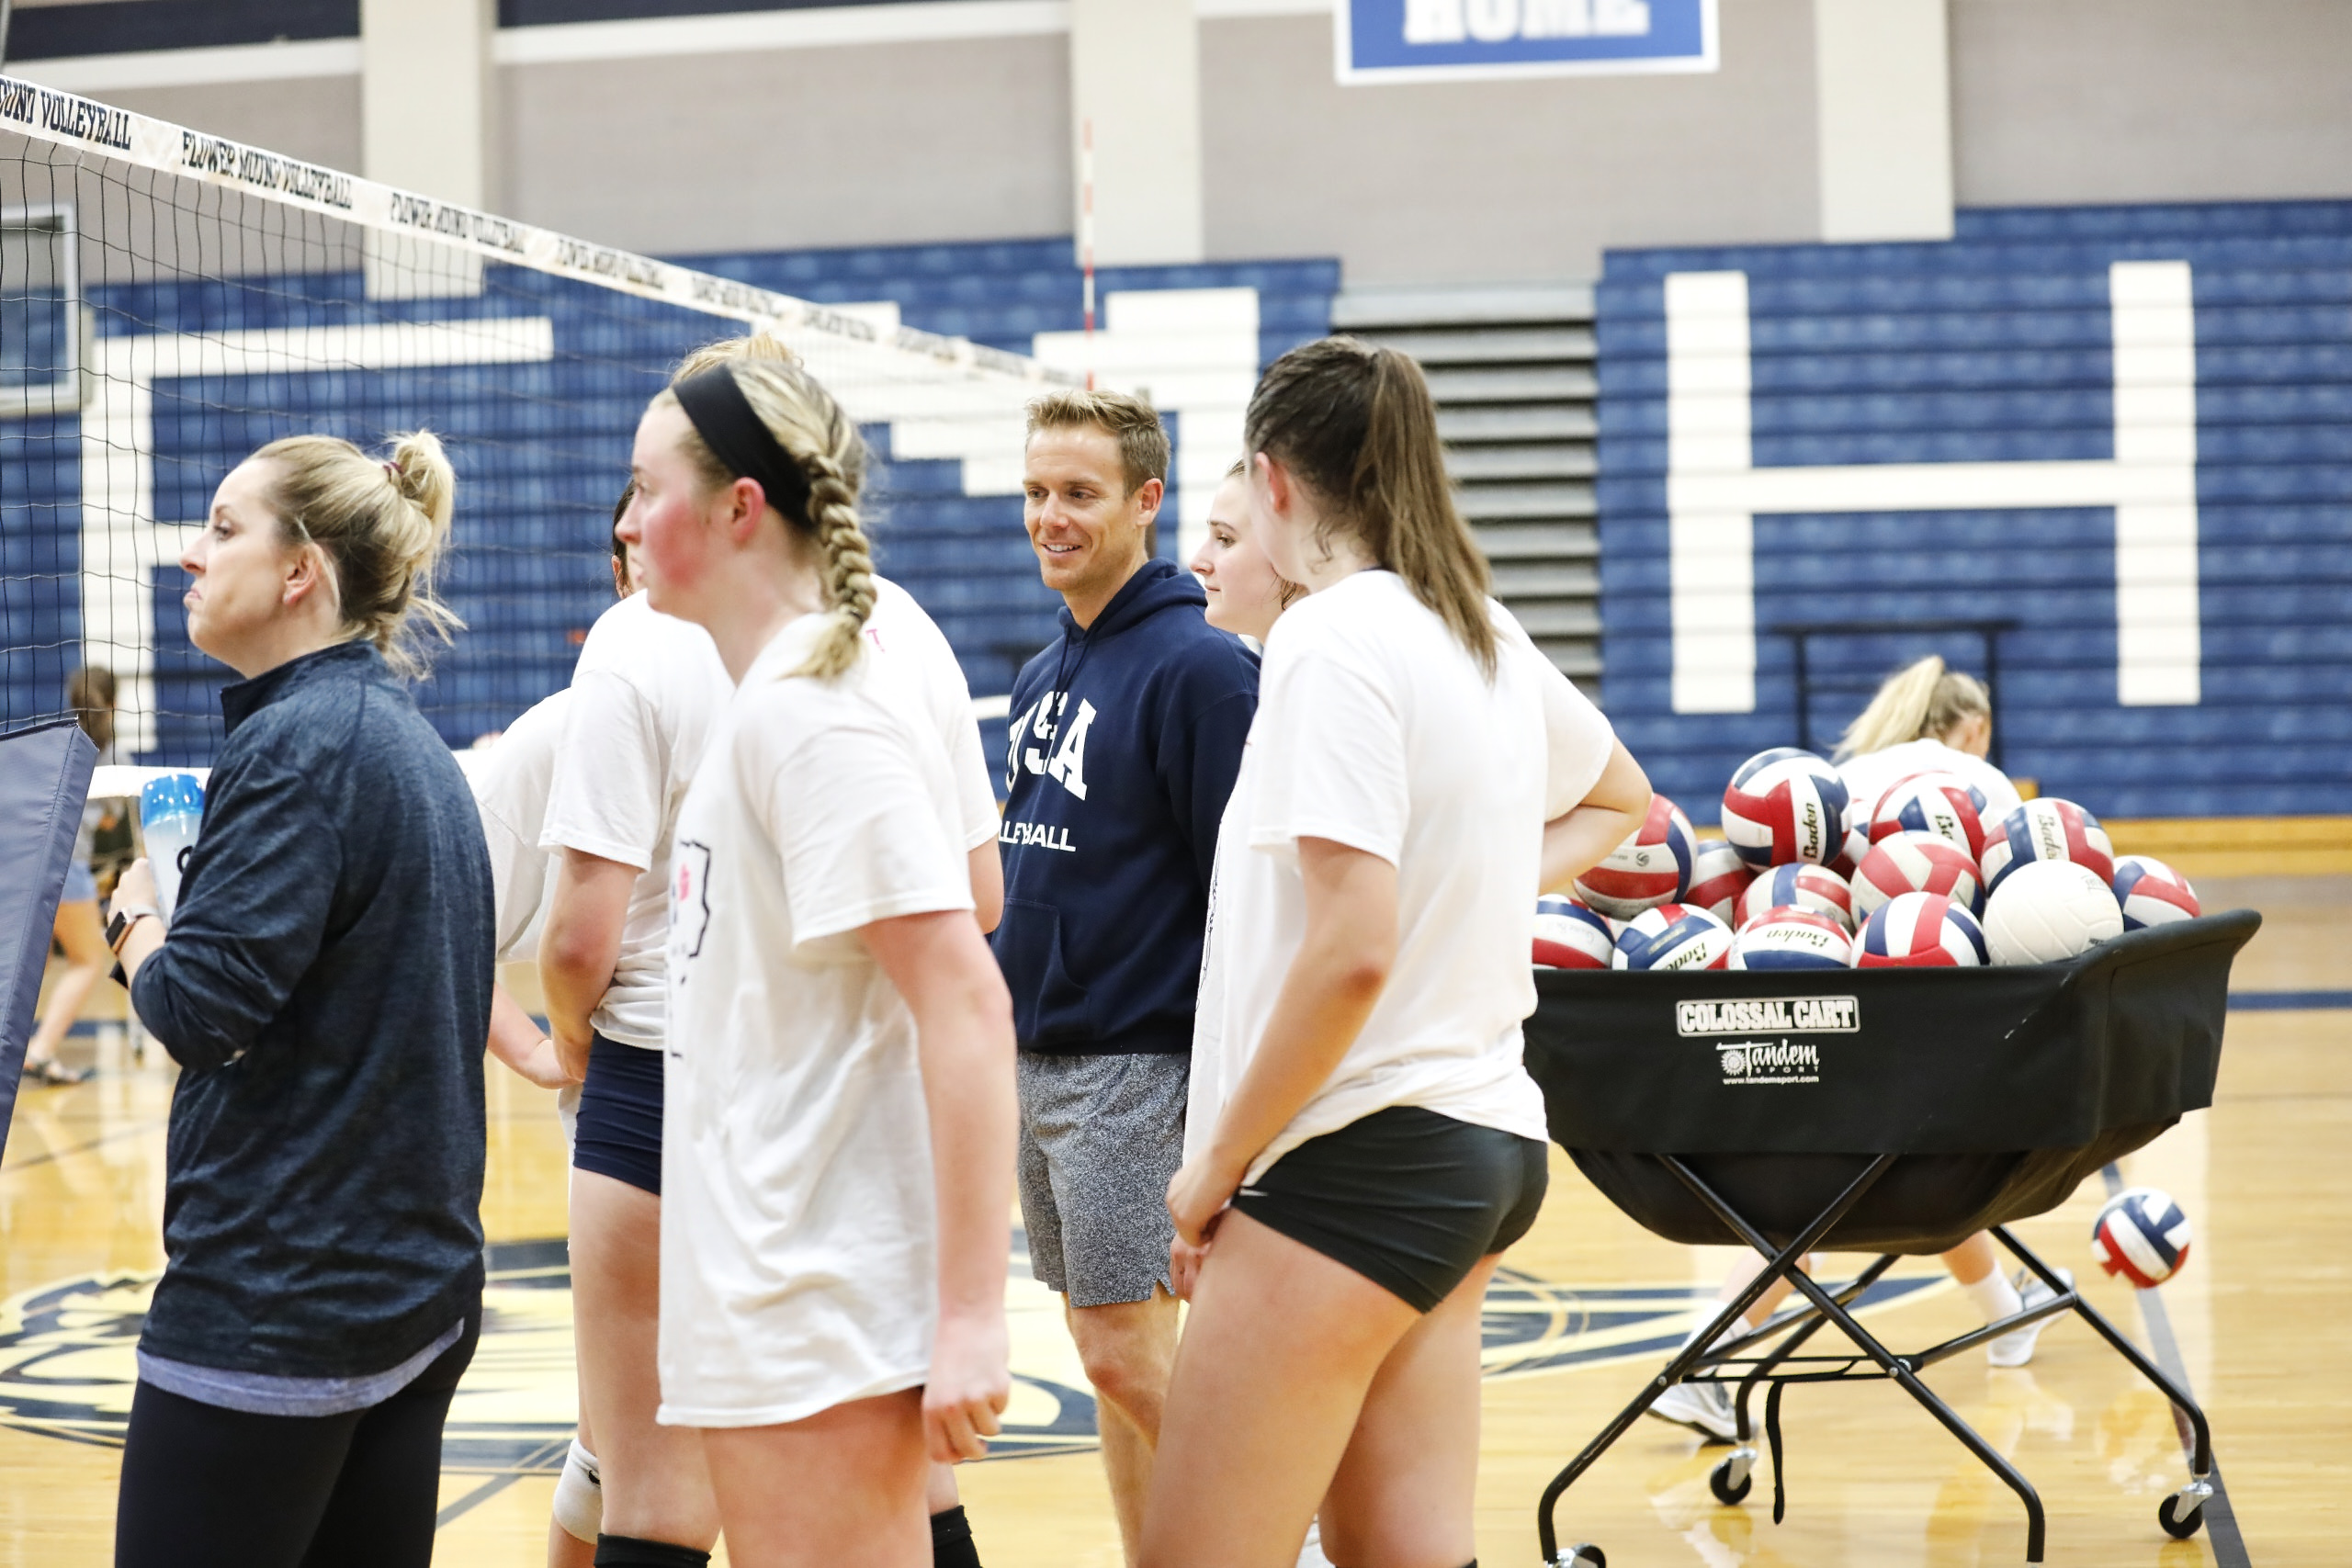 Fission Volleyball Coaches | Expert Volleyball Coaches That Care